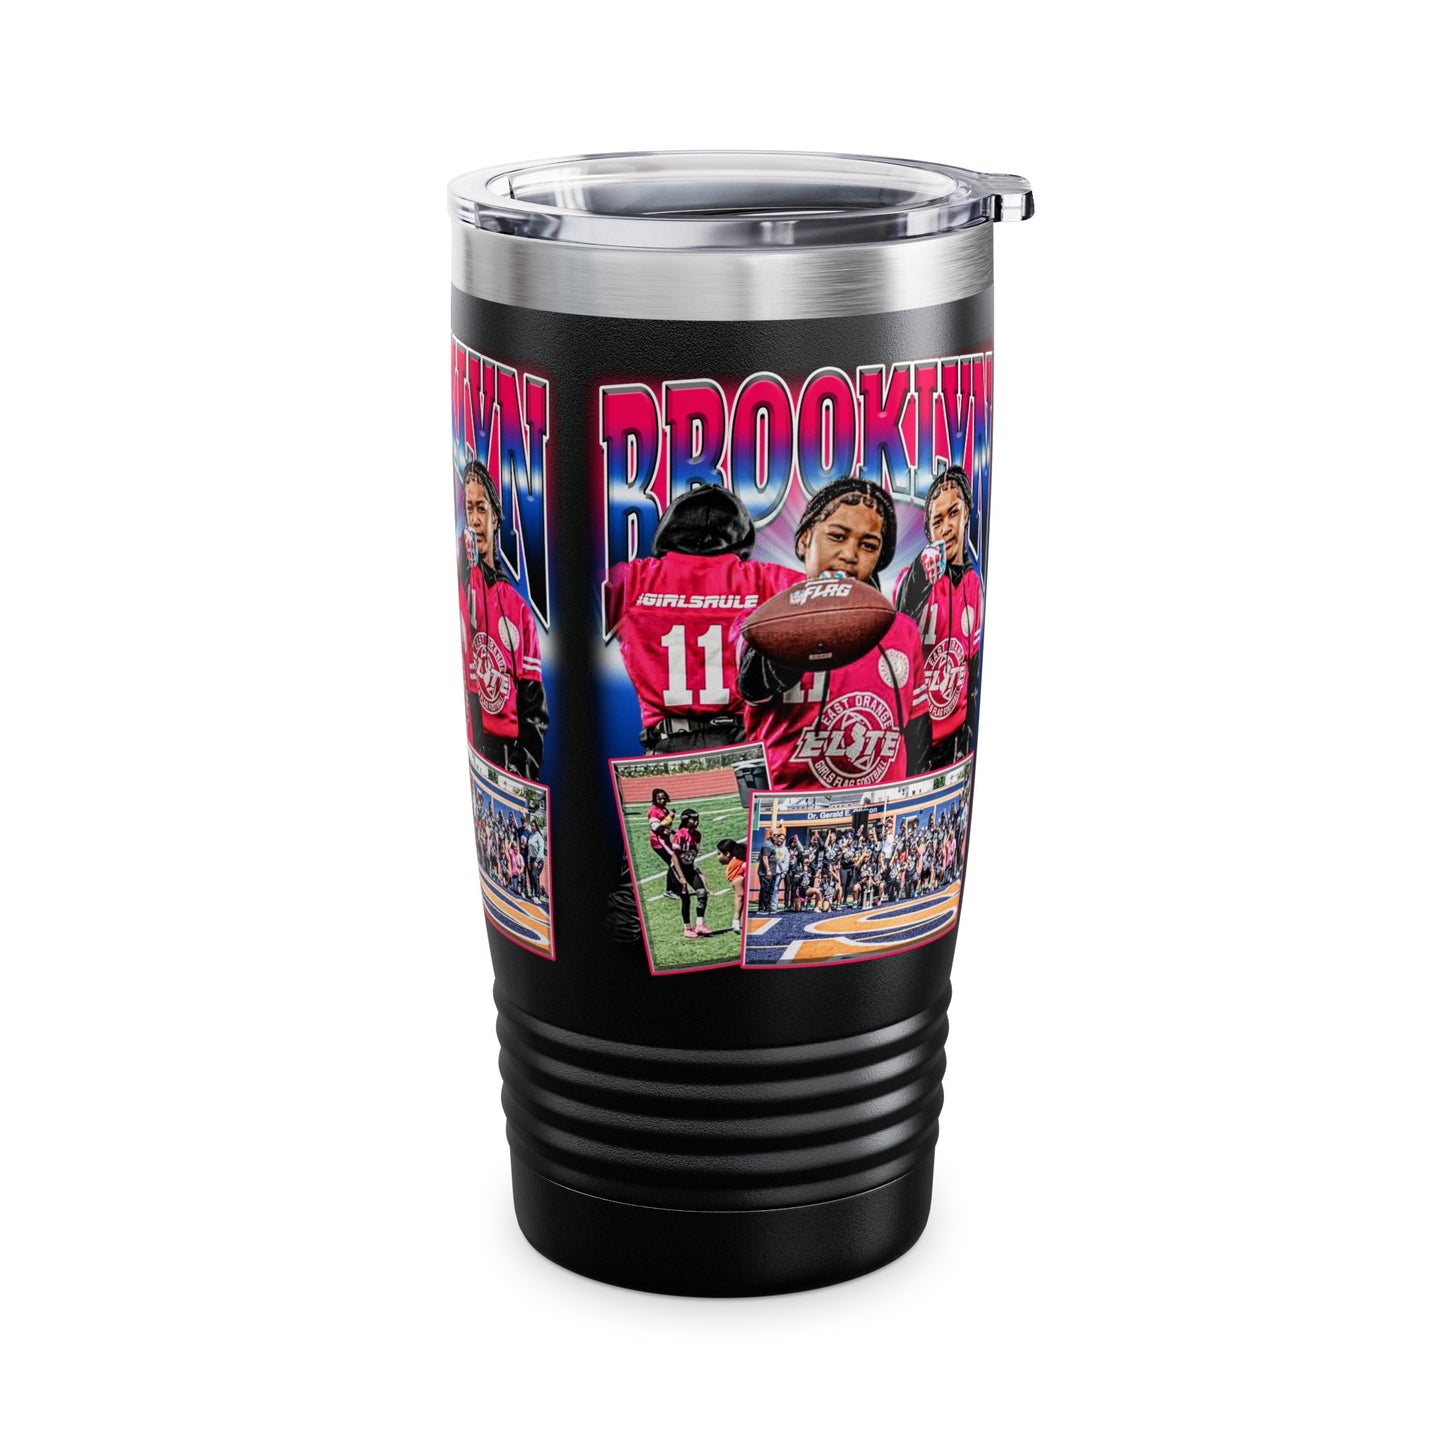 Brooklyn Stainless Steal Tumbler